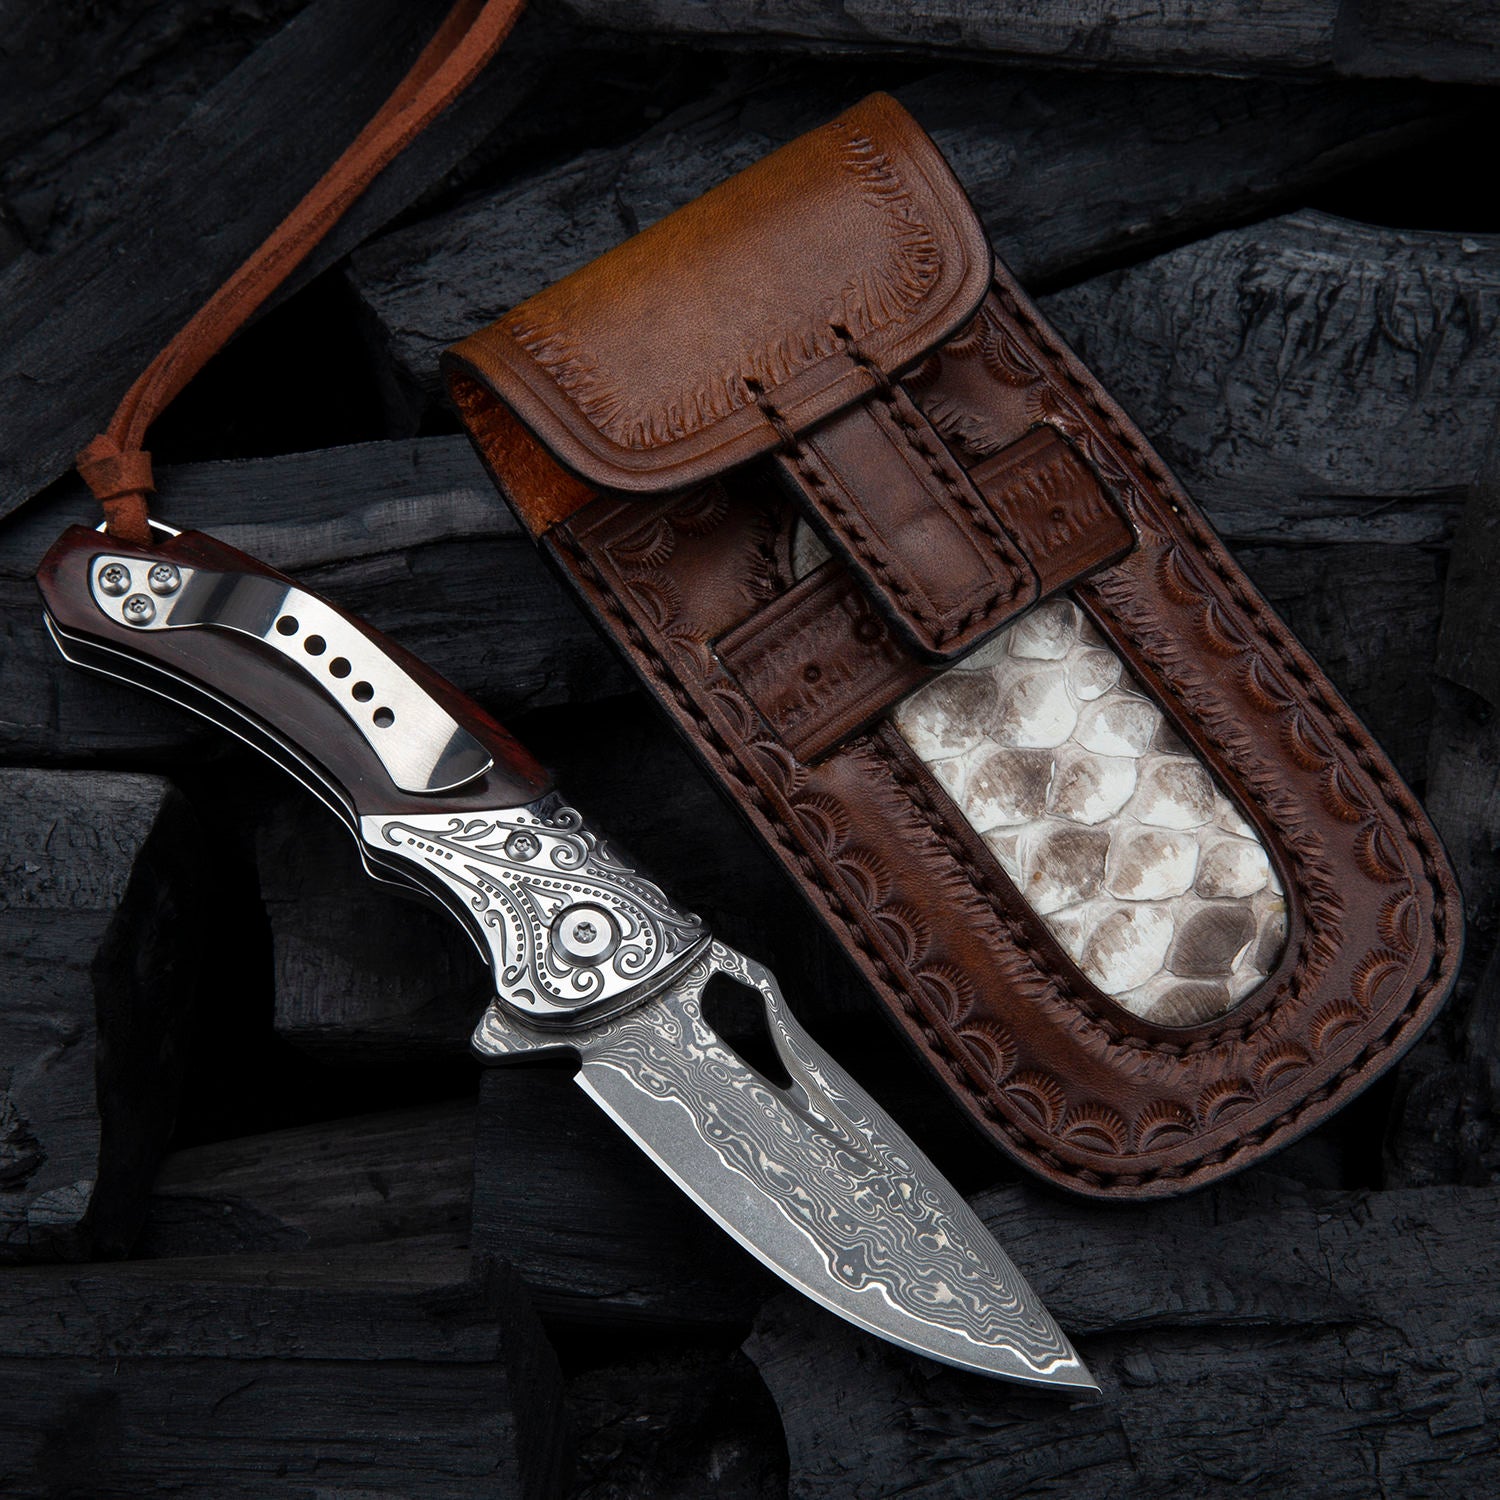 Rosewood Damascus Steel Knife with Clip